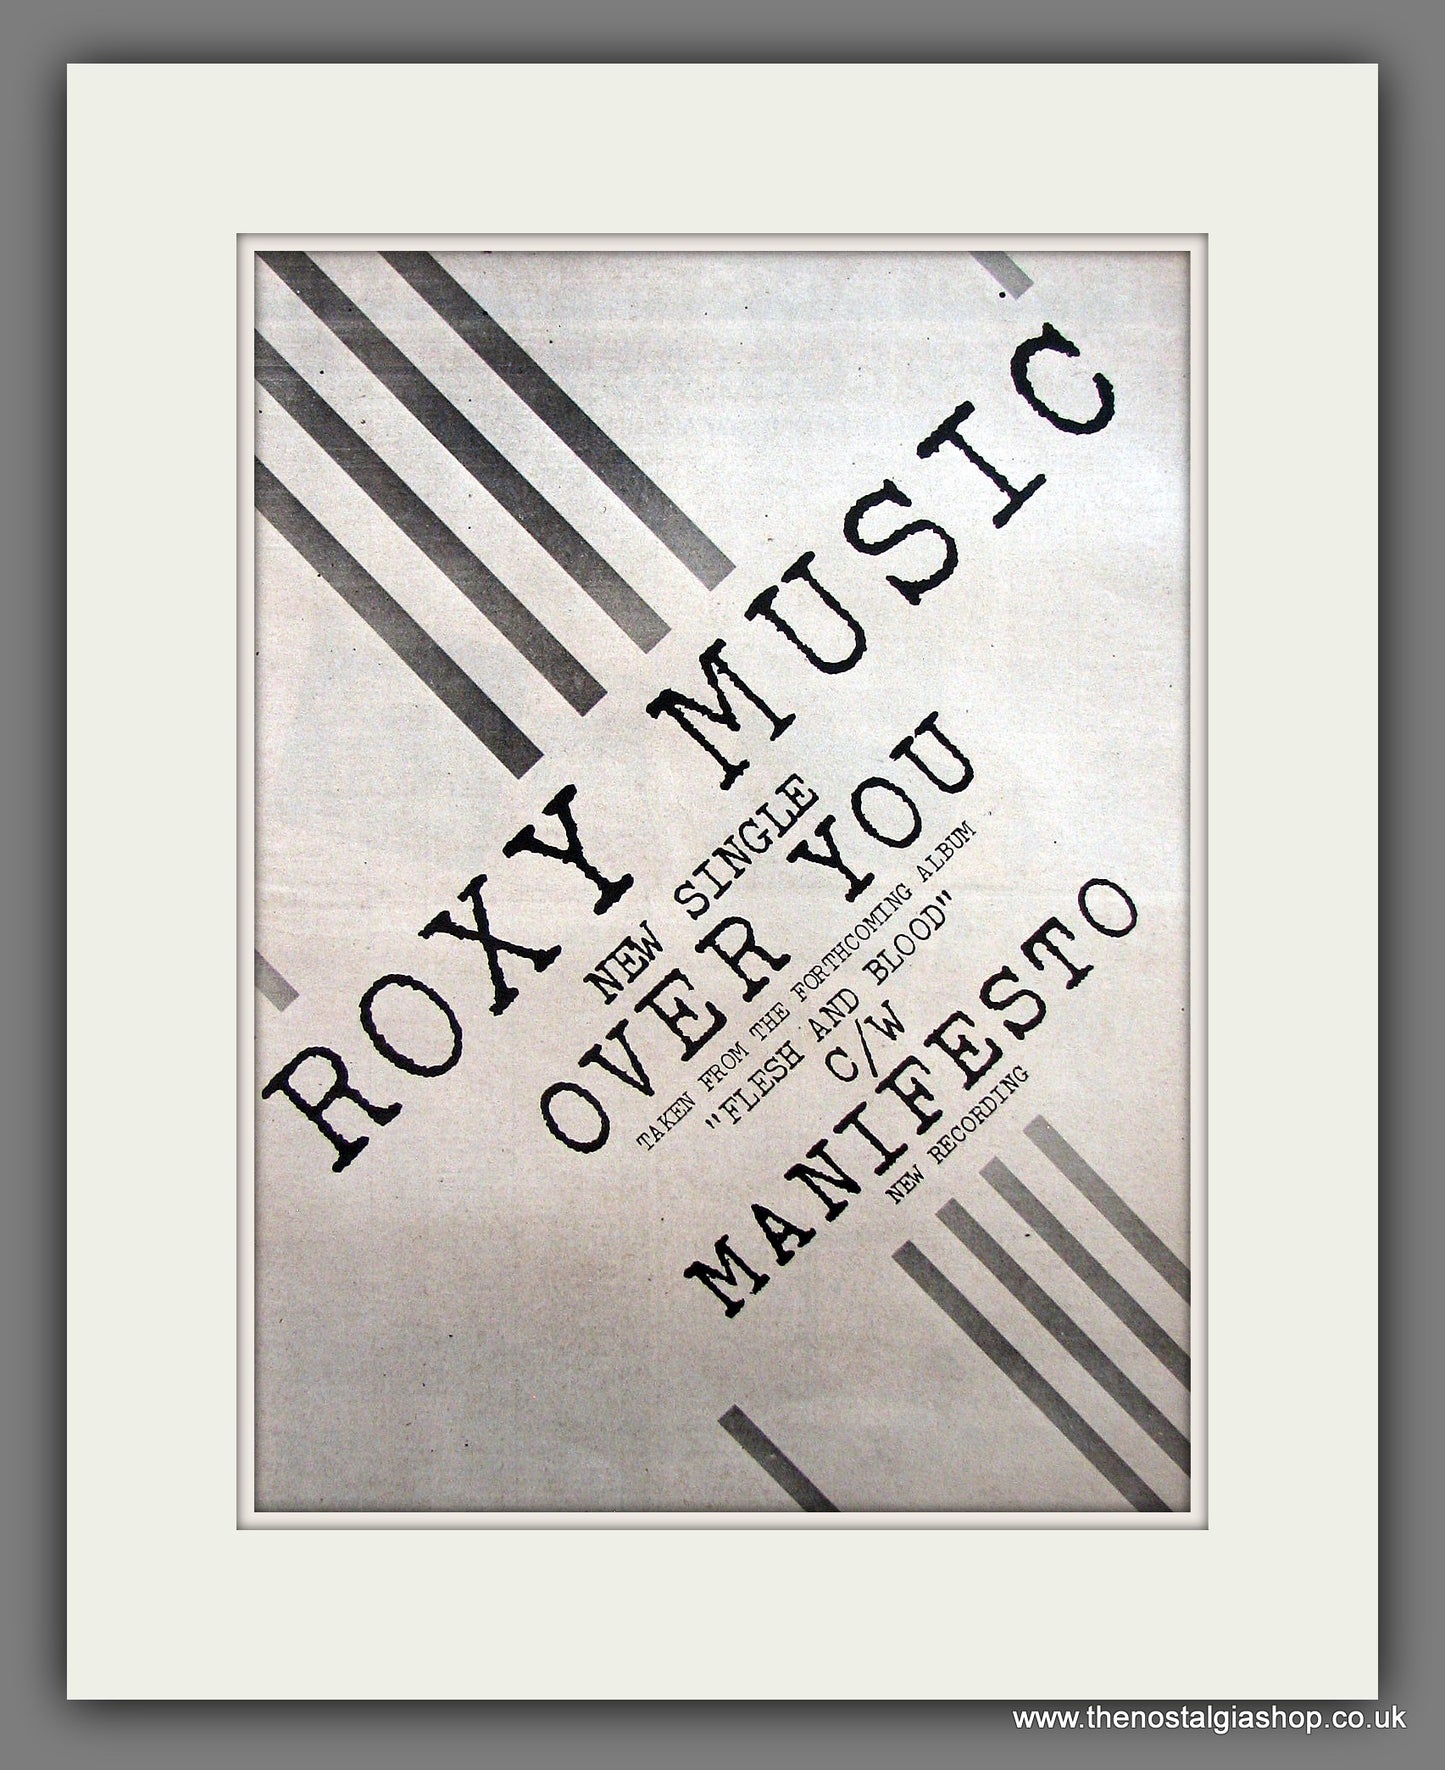 Roxy Music. Over You. Vintage Advert 1980 (ref AD13921)